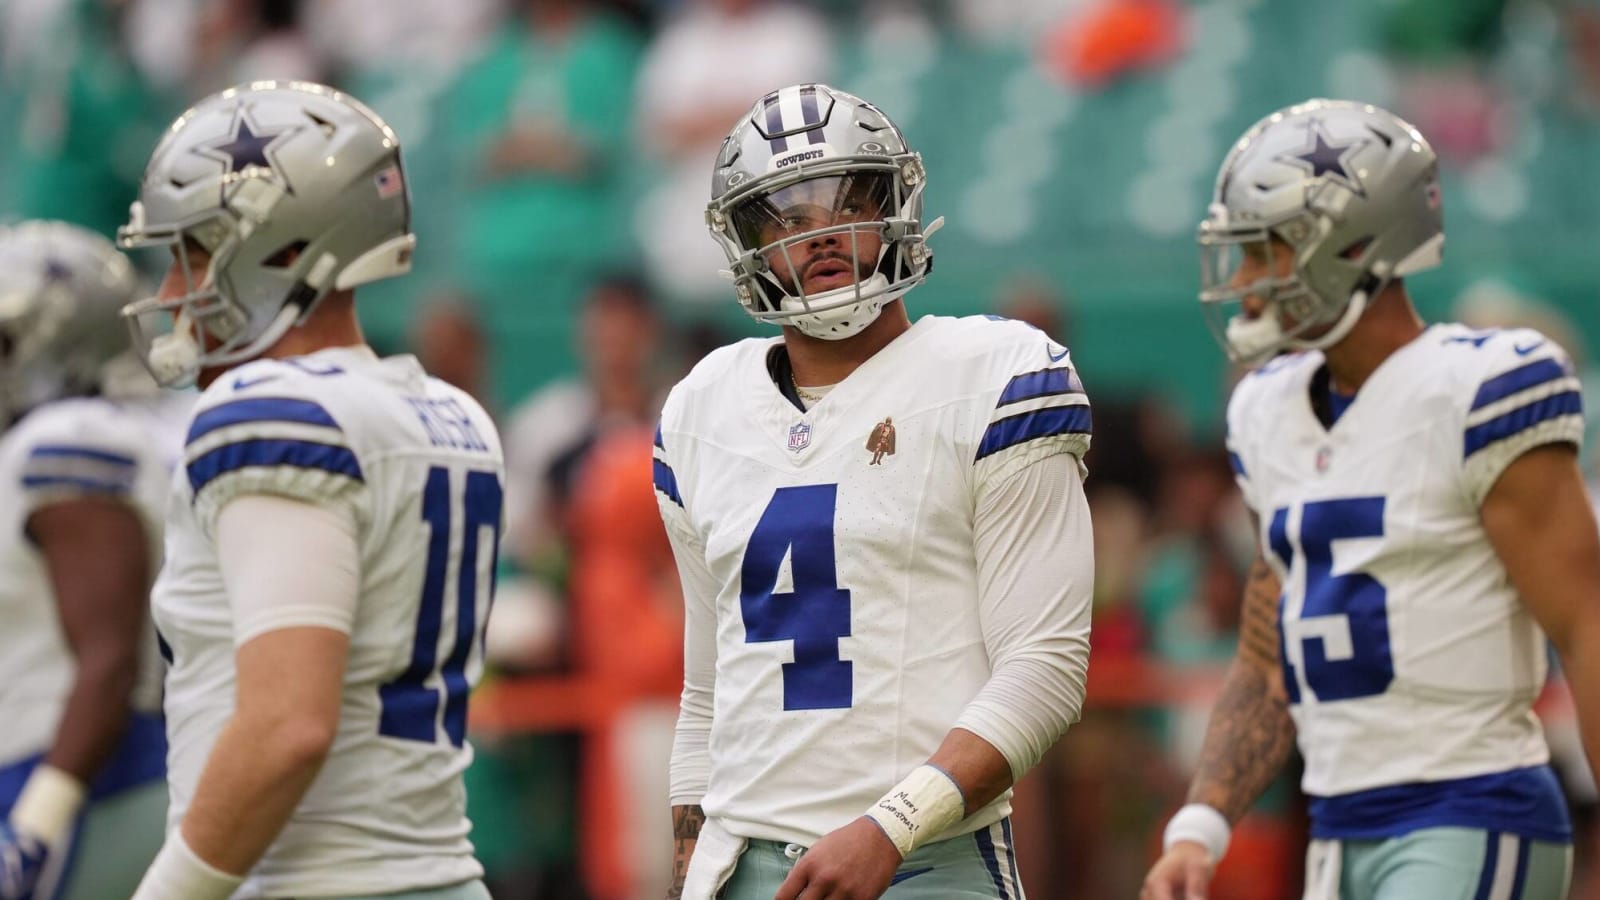 Dak’s contract negotiations are holding the Cowboys hostage